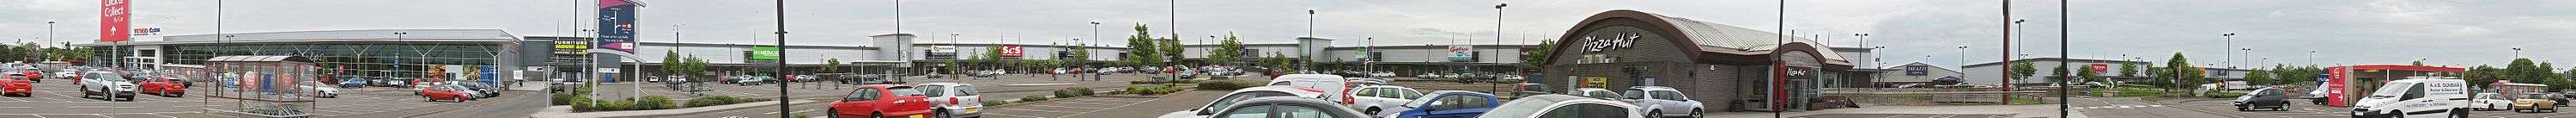 Kingsway West Retail Park in Dundee, Scotland.&#91;&#93;